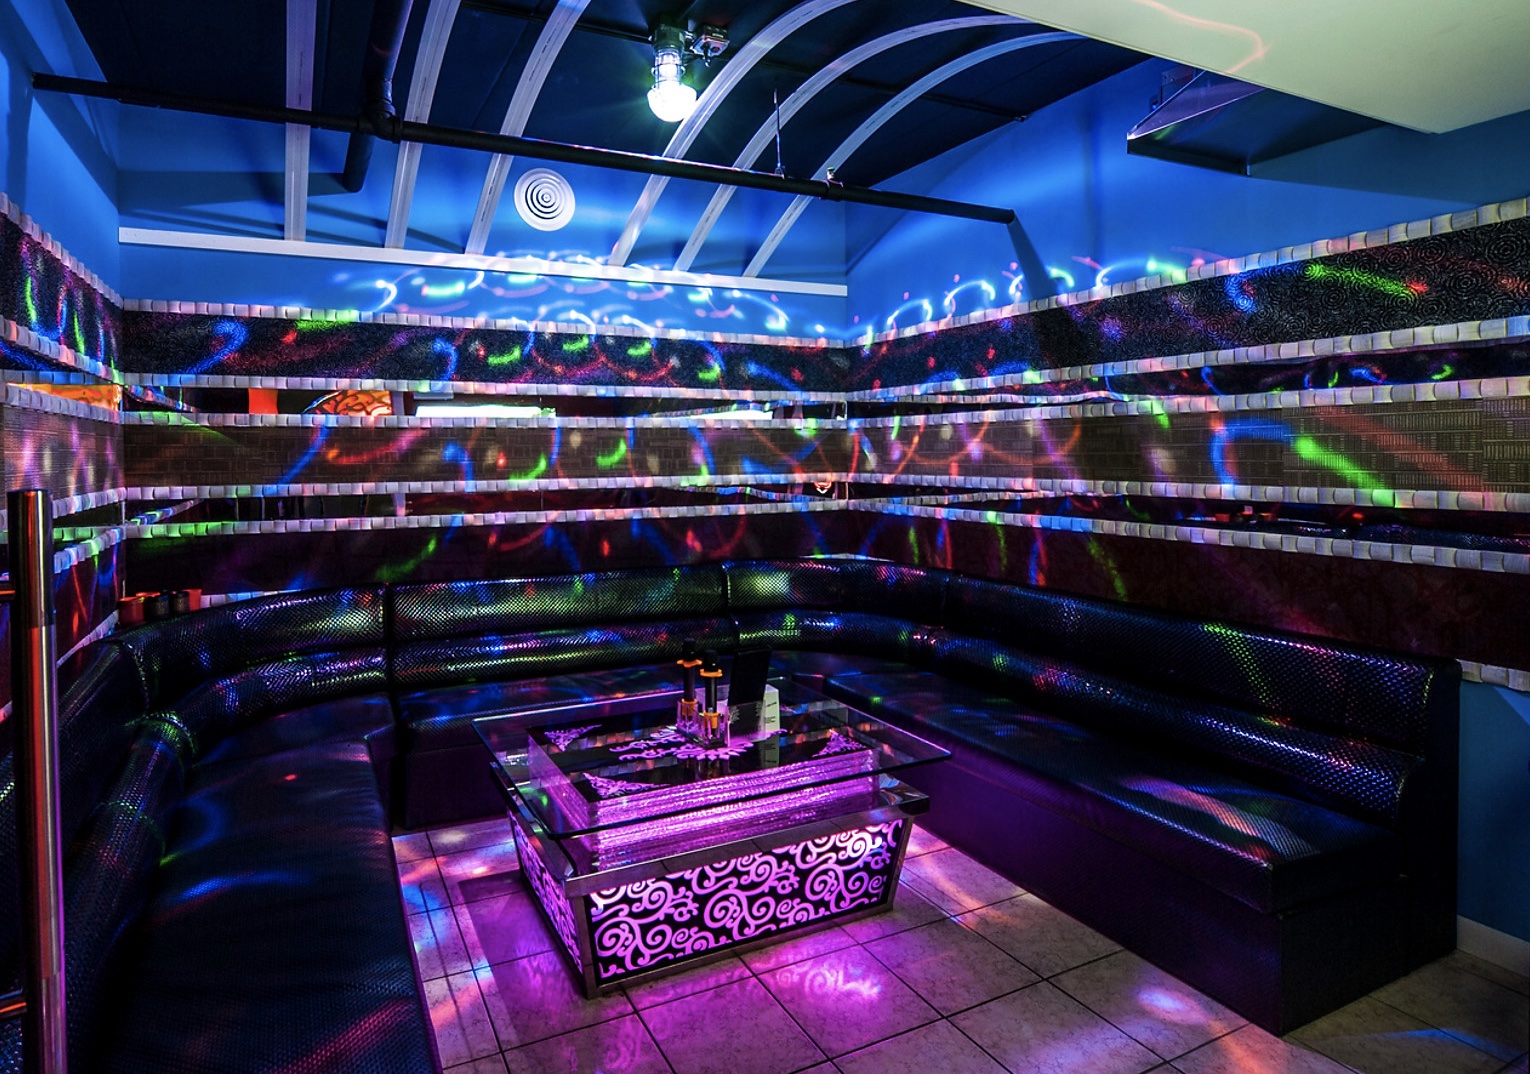 private room at sakura karaoke bar with multicolored lights, a black booth, and table in the center with two microphones